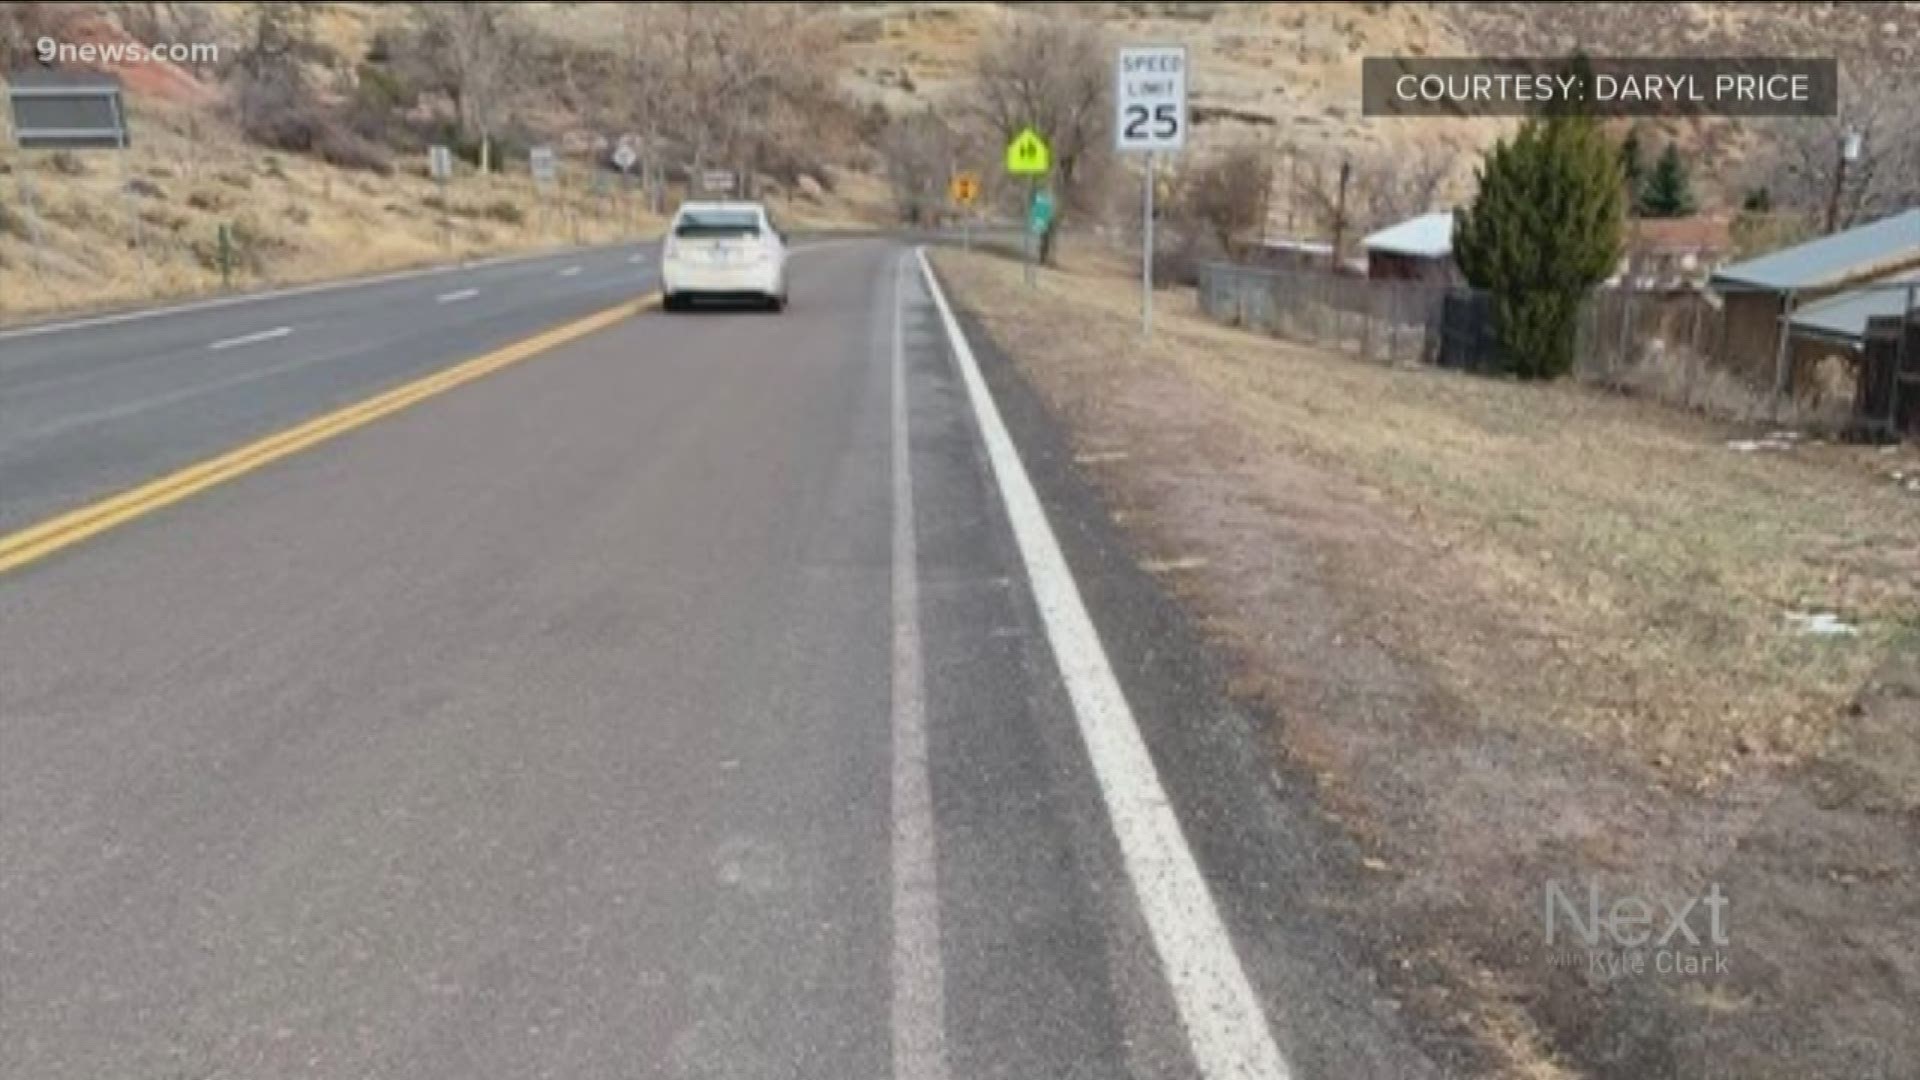 CDOT said this isn't a bike lane on HWY 74, it's a shoulder. They aren't expecting cyclists to ride a tightrope of pavement. Bikes are supposed to be on the road.